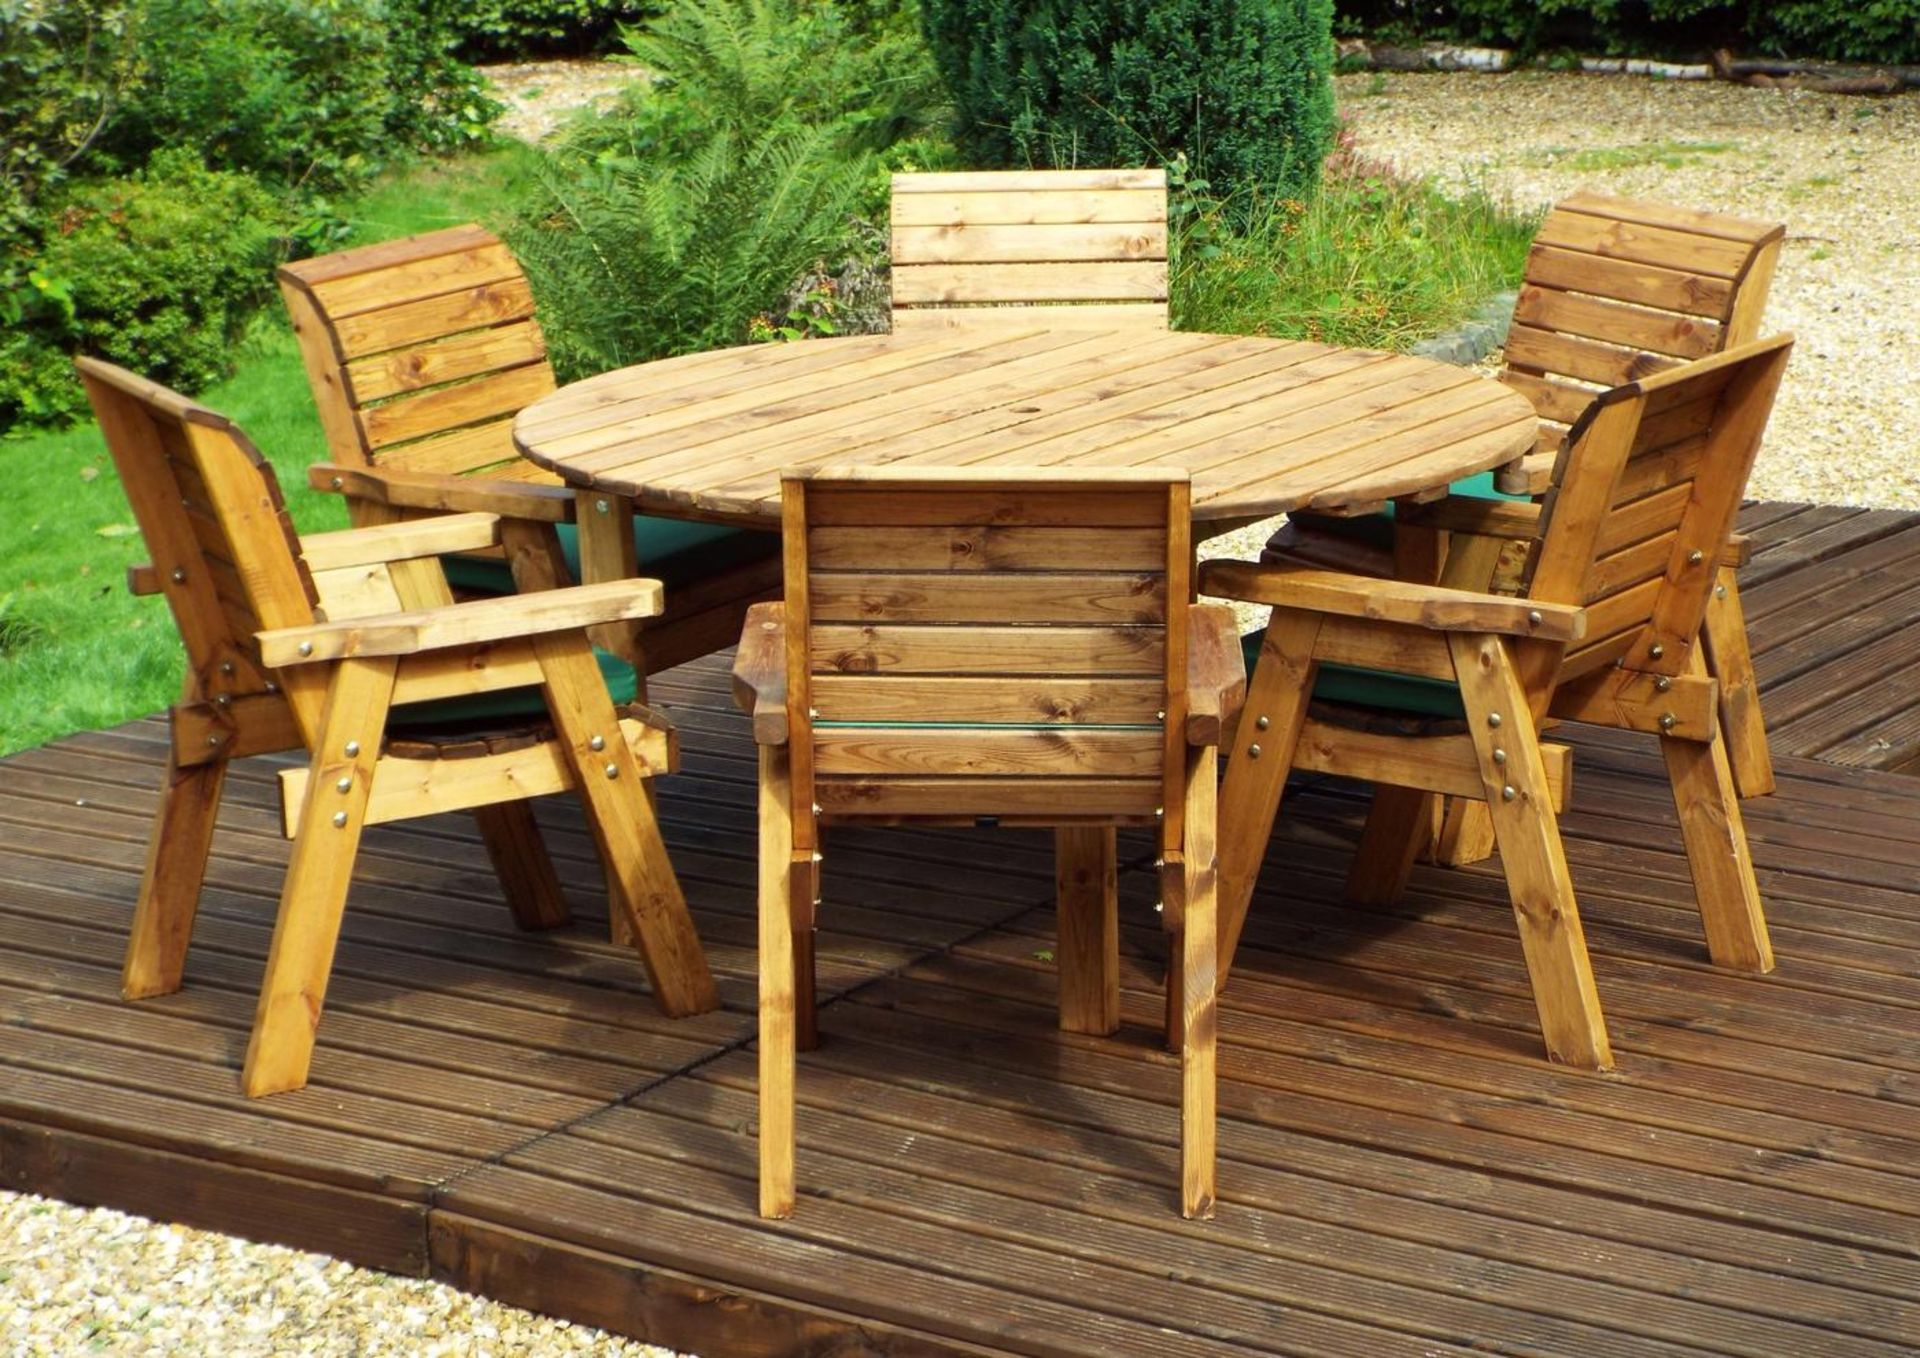 Six Seater Circular Table Set is a classic outdoor dining table and chairs. This superb outdoor - Bild 3 aus 3